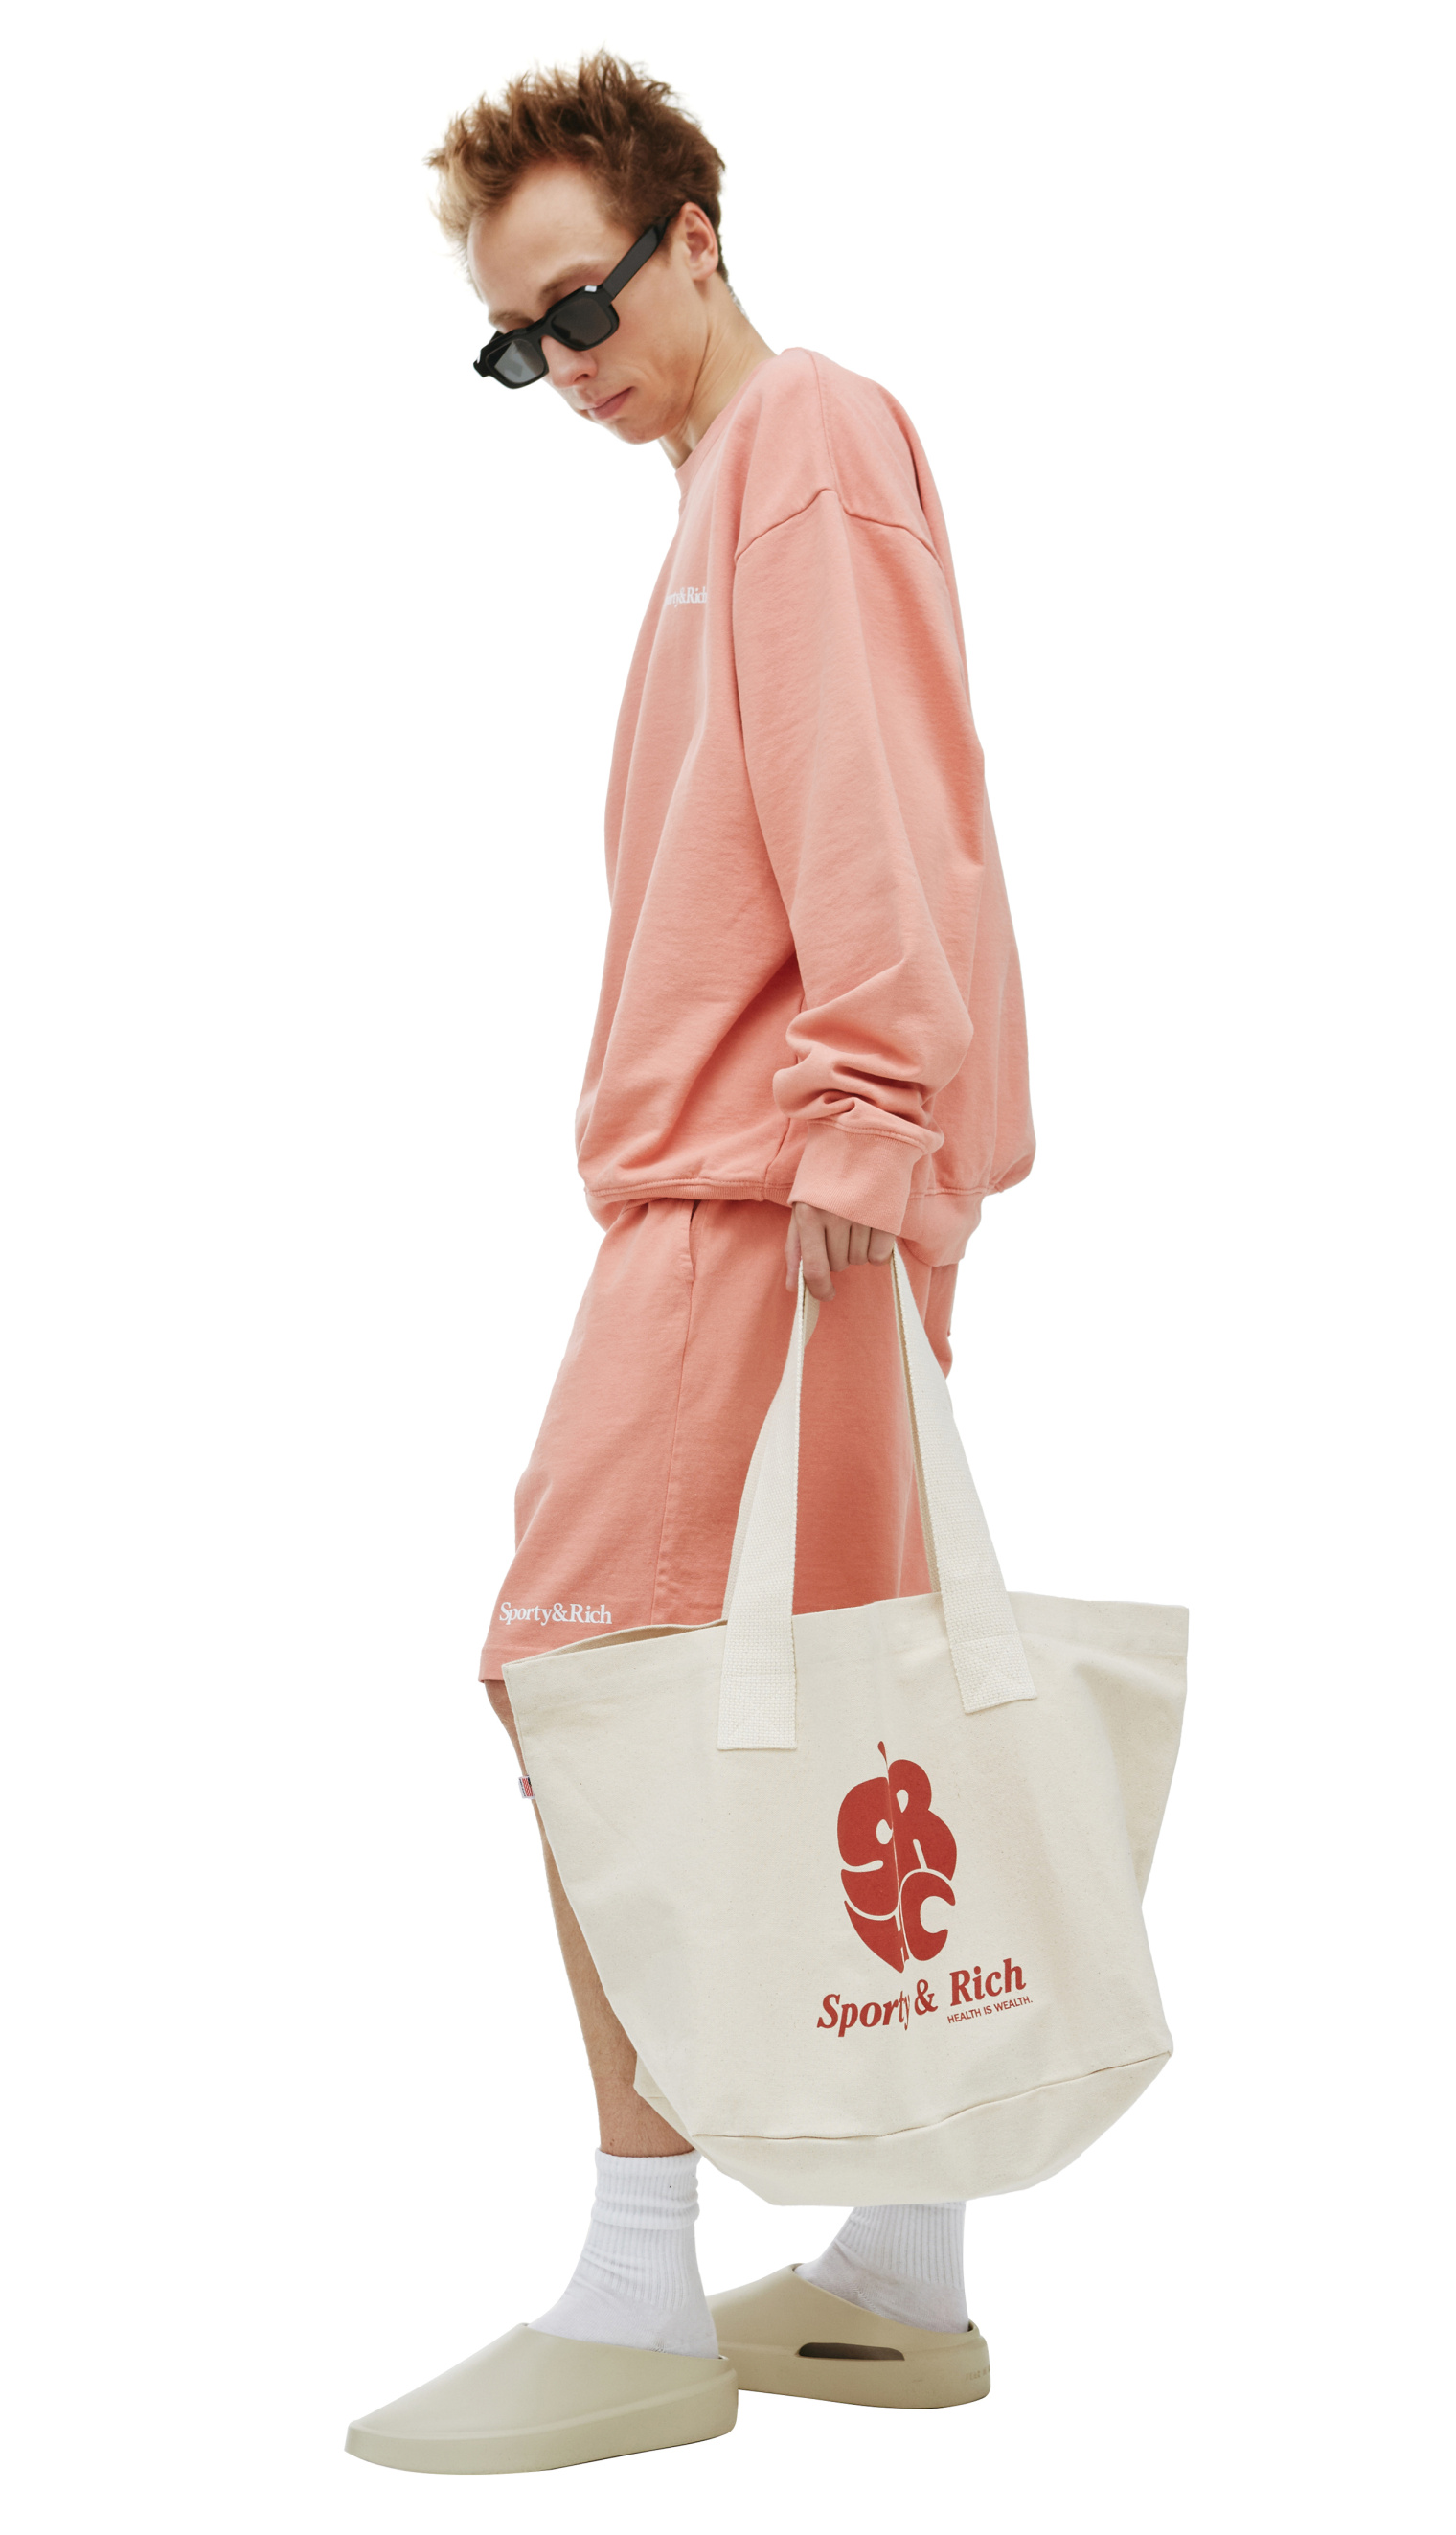 SPORTY & RICH Apple tote